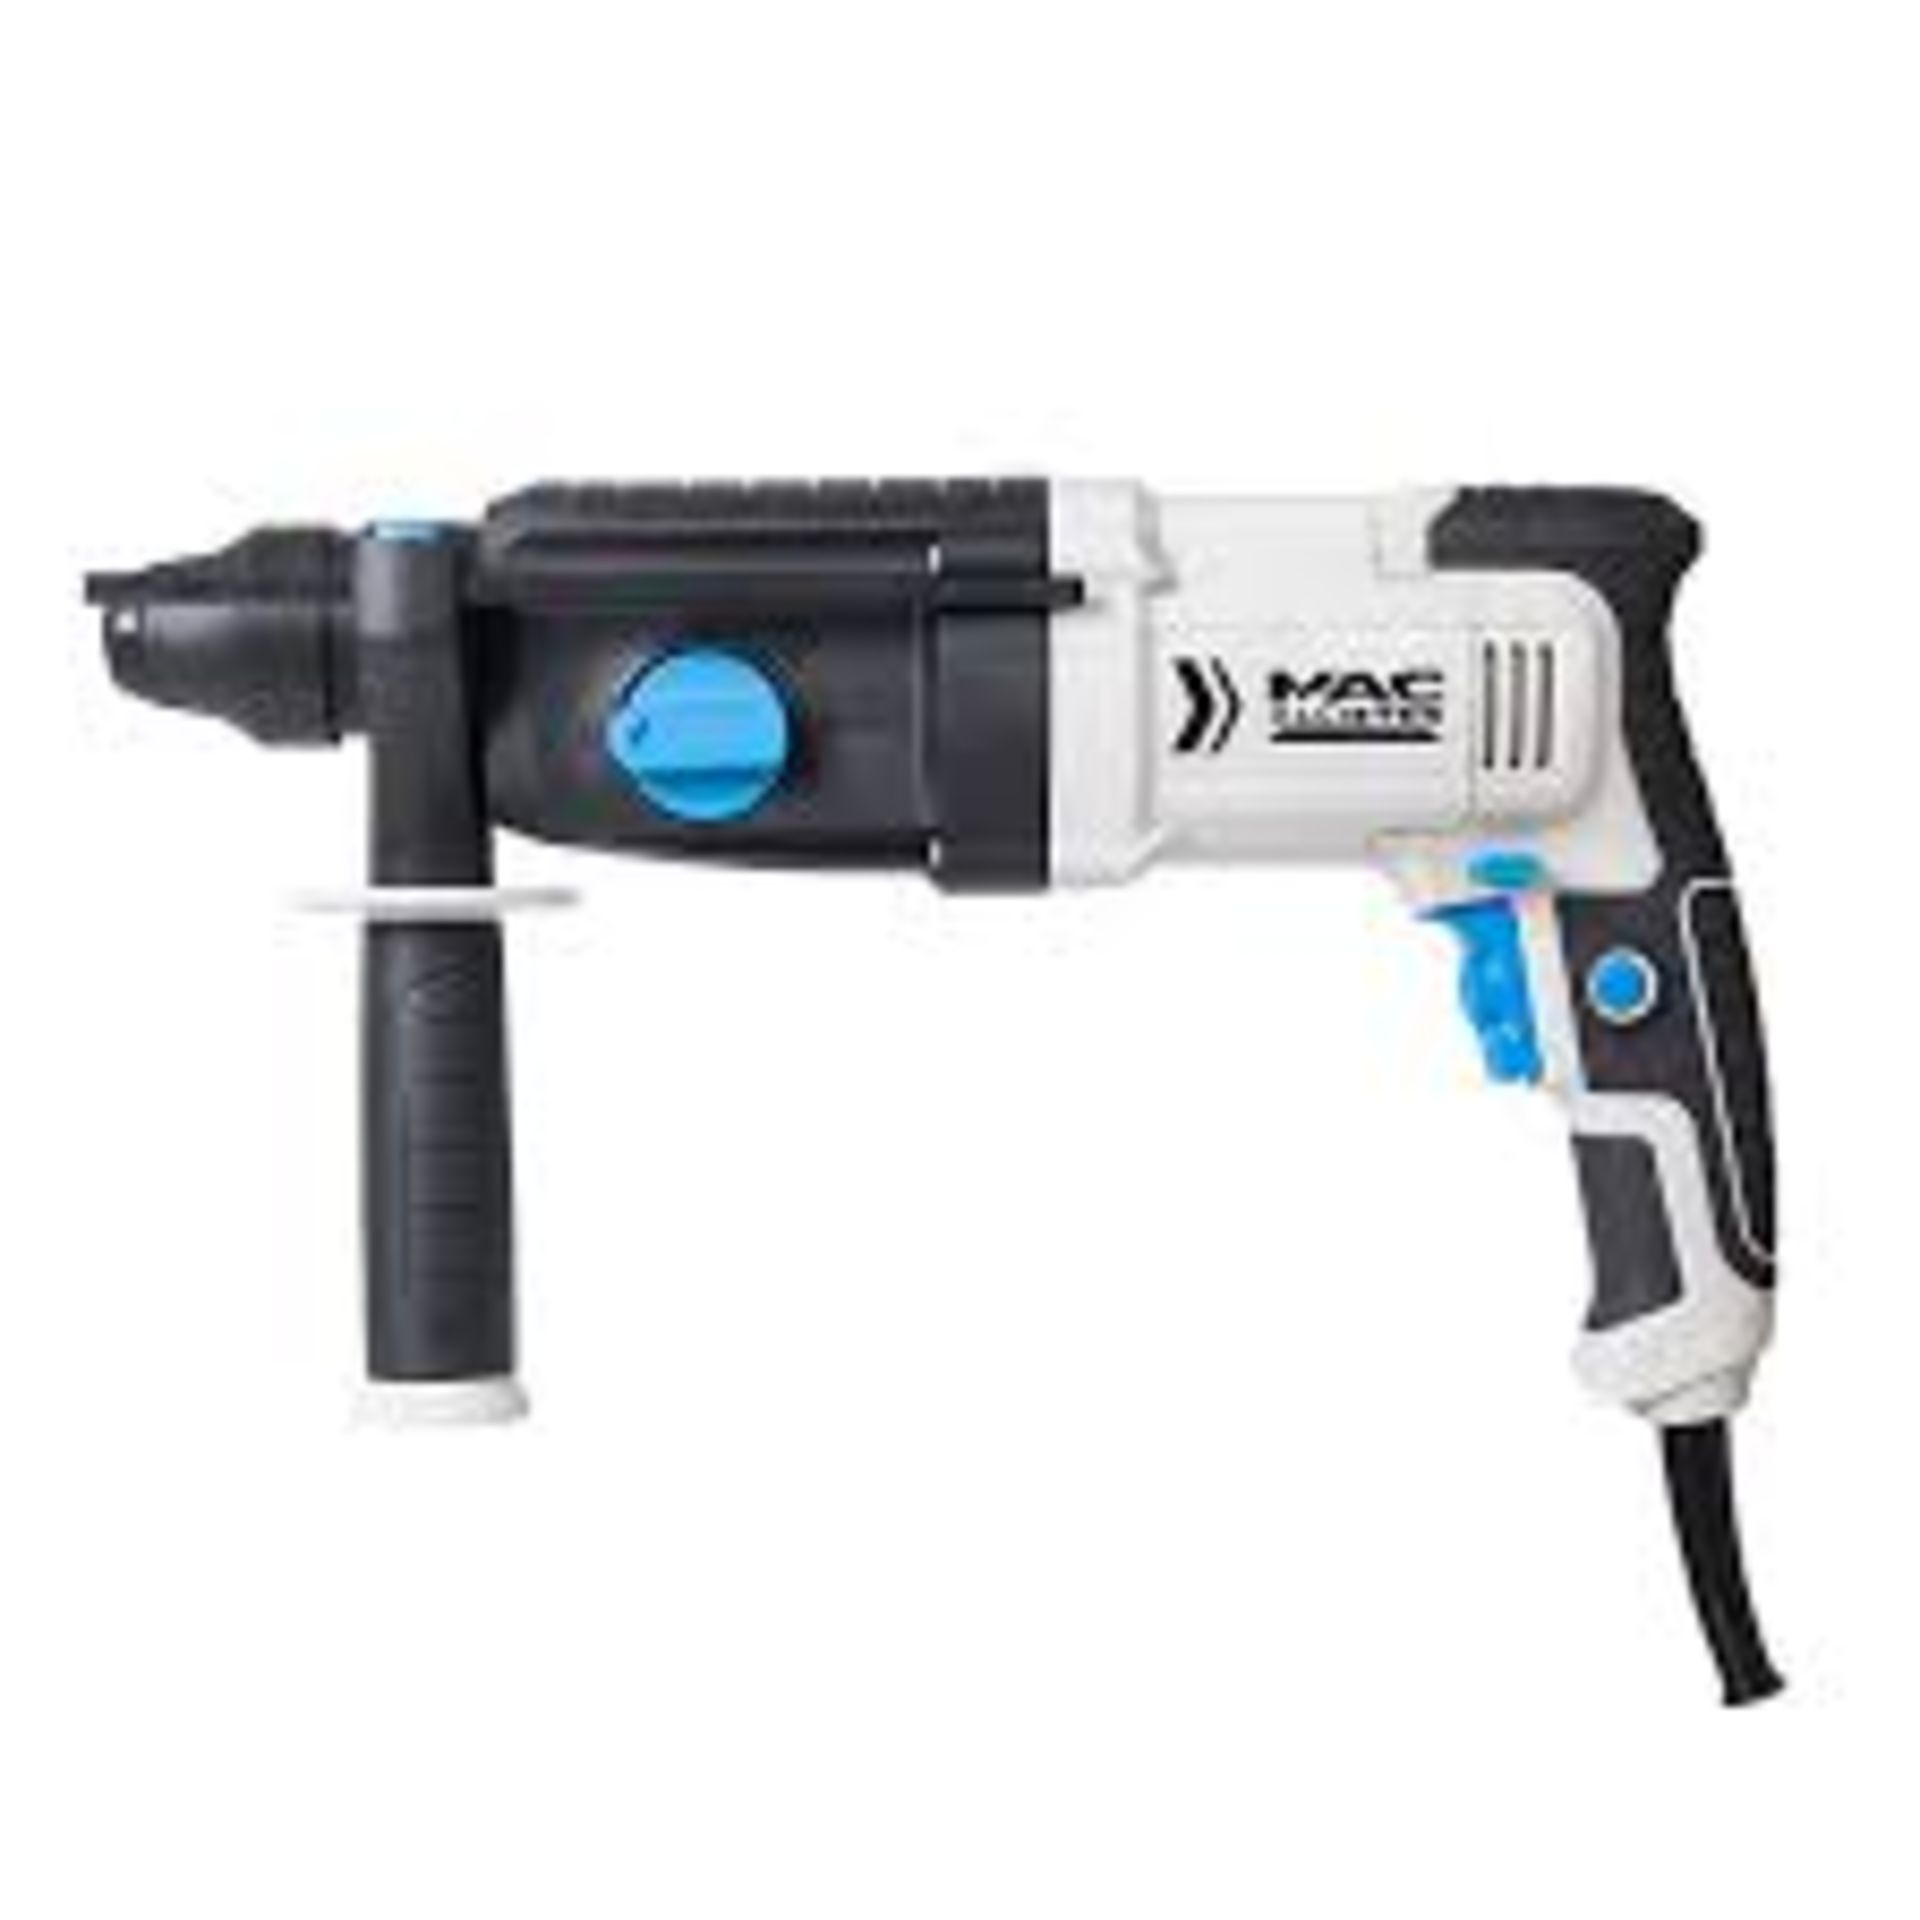 Mac Allister Rotary Hammer Drill Electric MRH750 SDS Powerful. -ER51. Includes powerful 750W motor